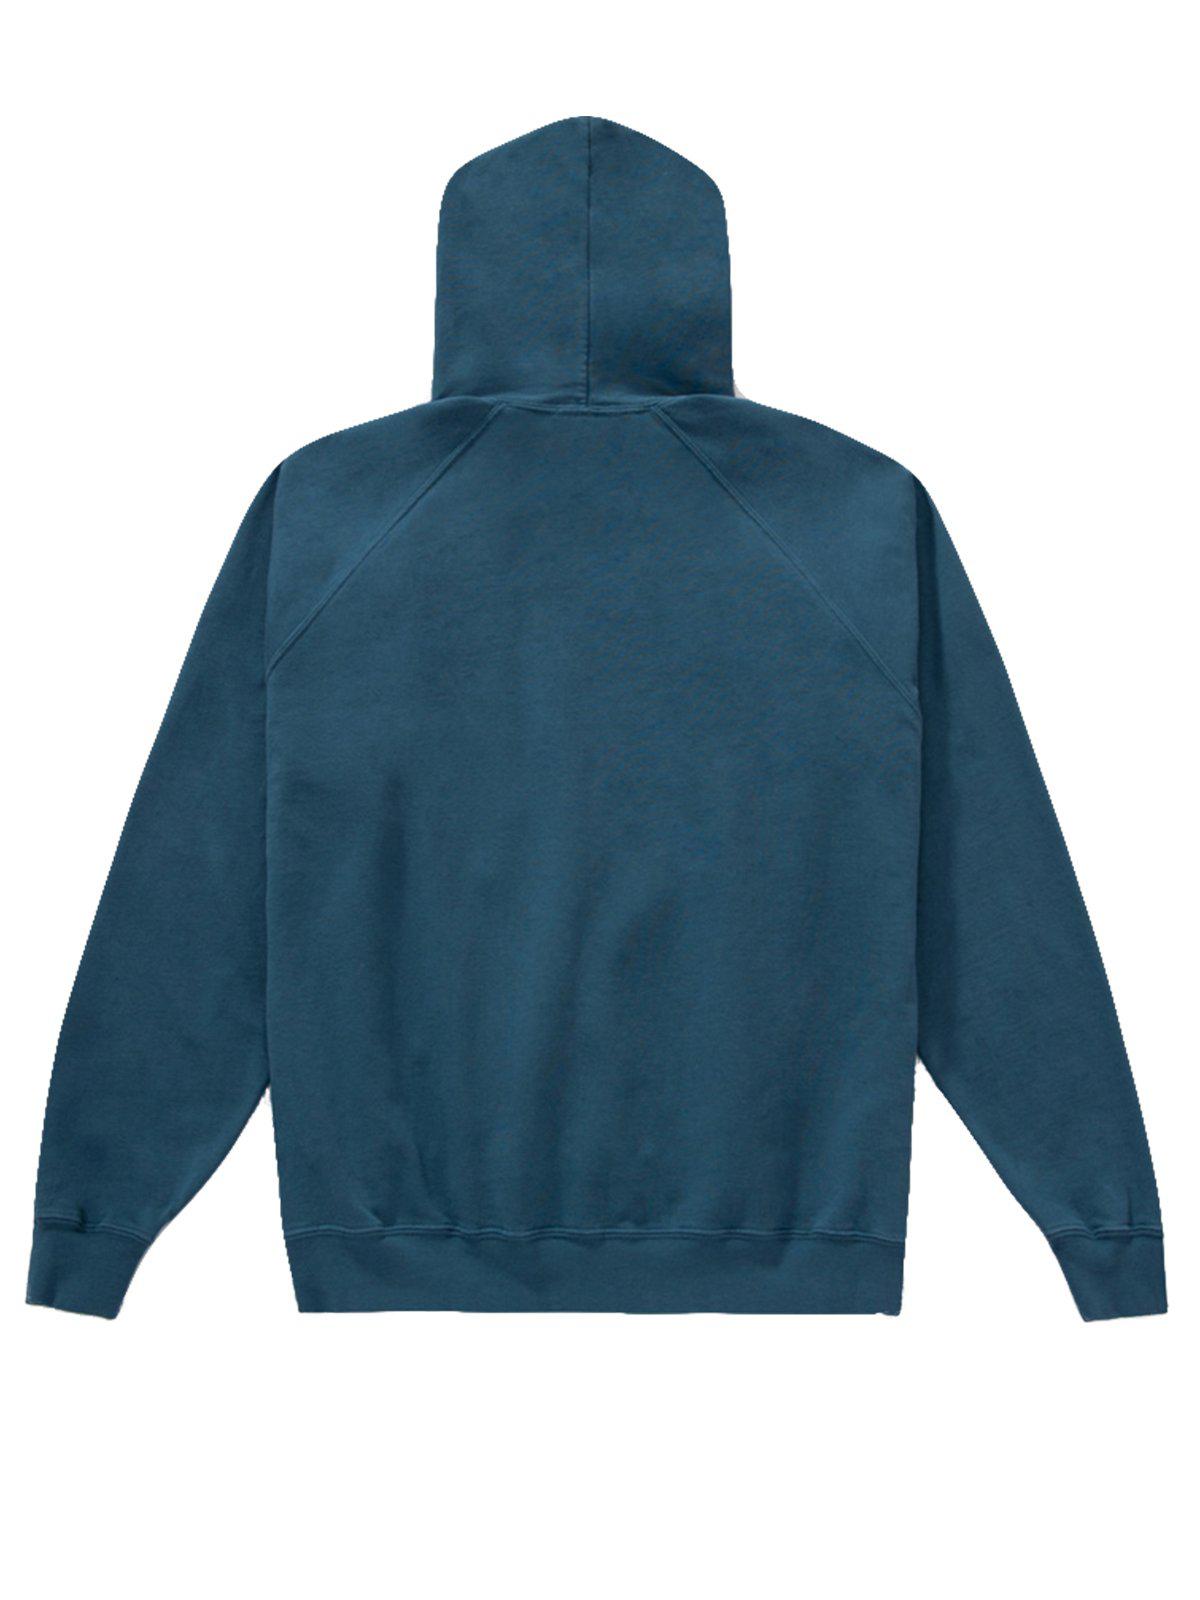 Lady White Co. Llewyn Hoodie Neptune Blue - MORE by Morello Indonesia